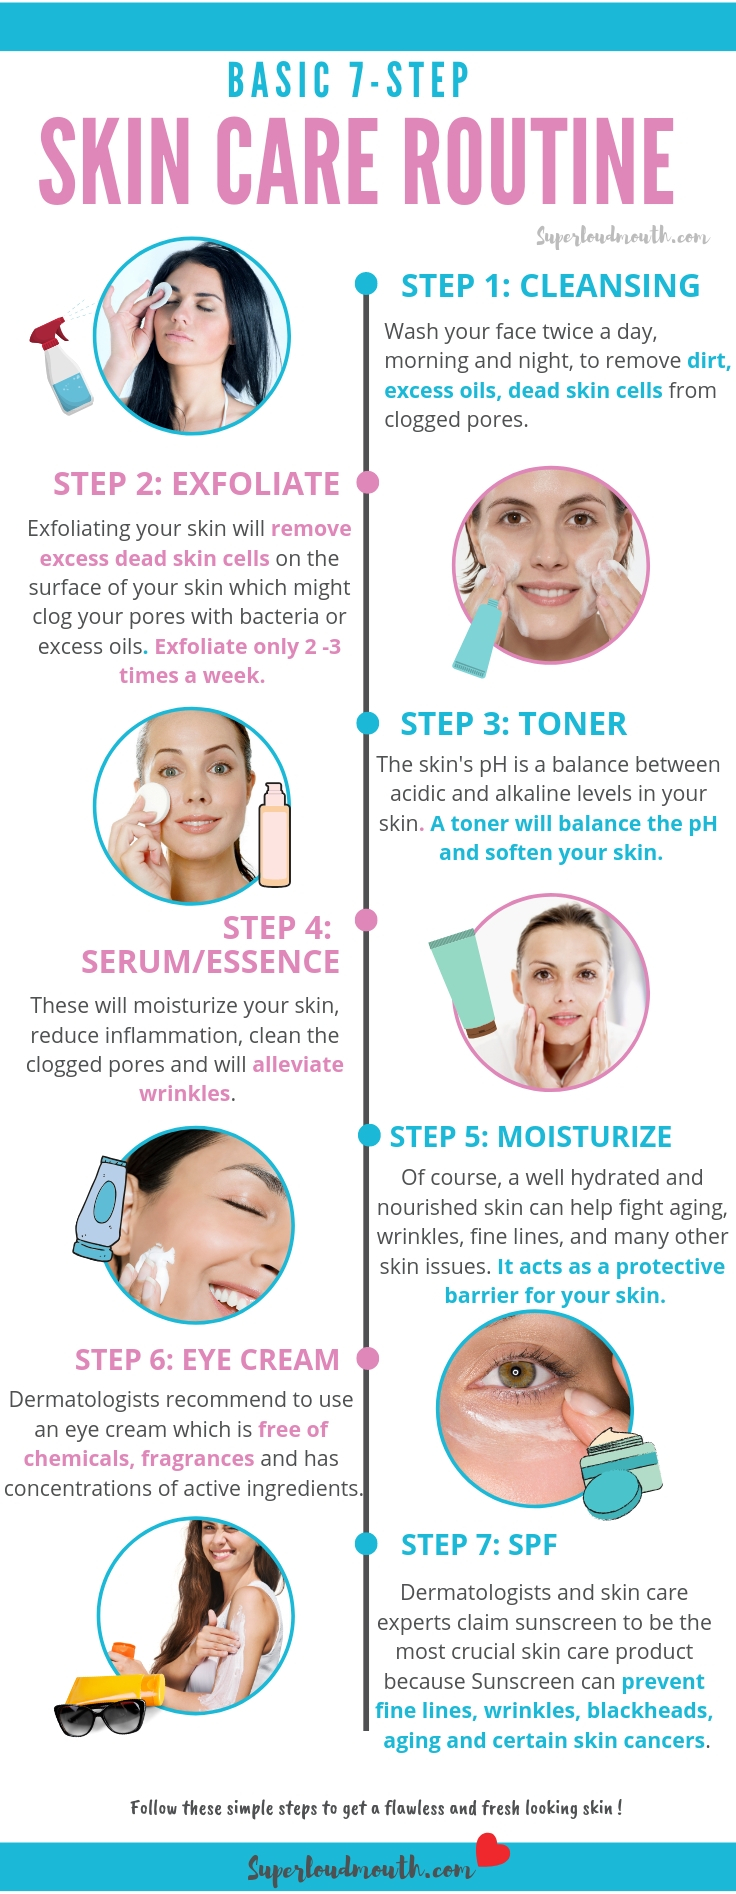 How To Settle On Natural Facial Skin Care - Eco-Friendly Help Living!